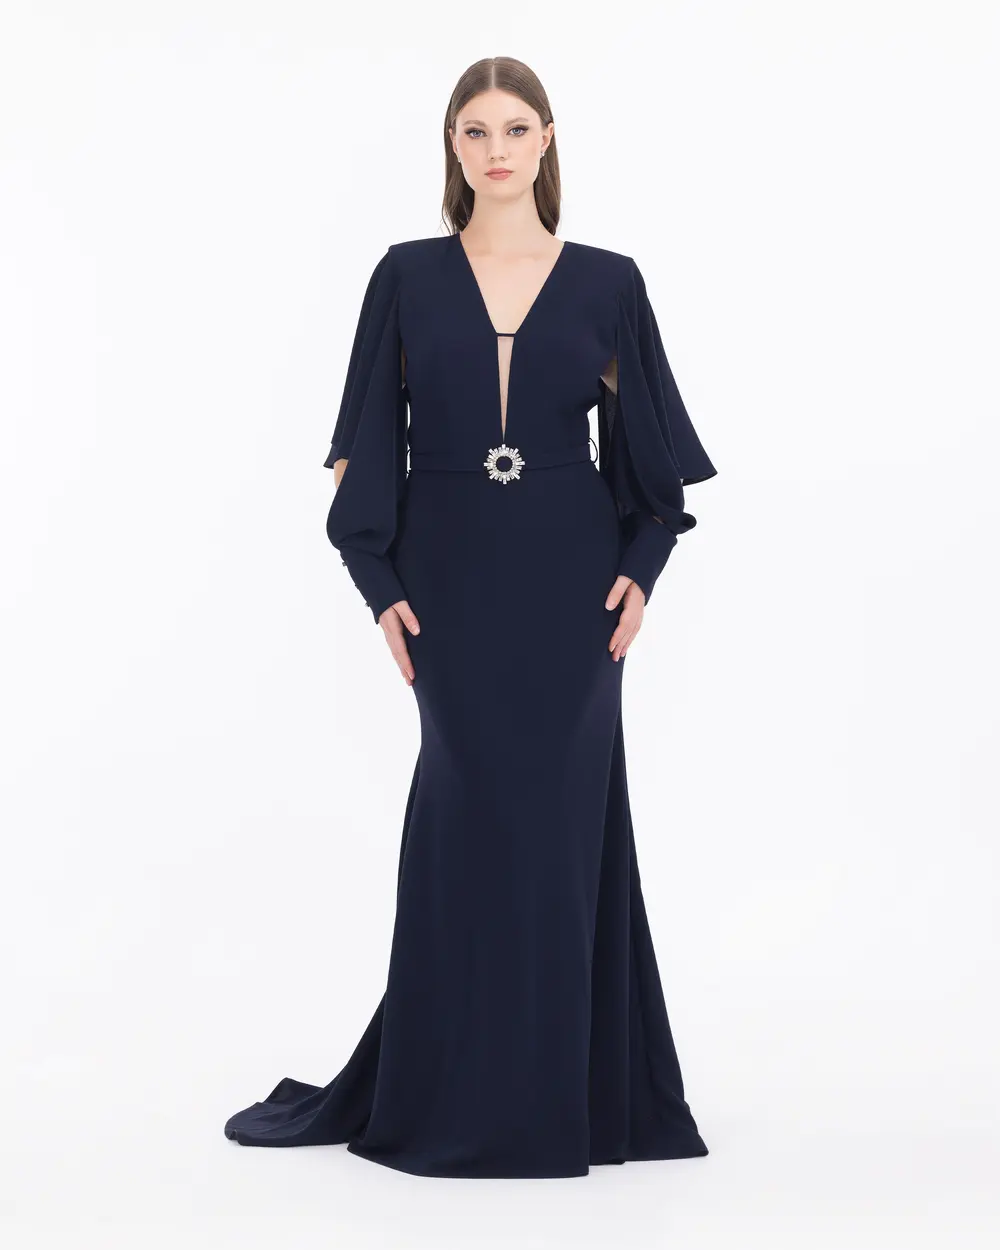 Arched Fish Form Crepe Fabric Evening Dress